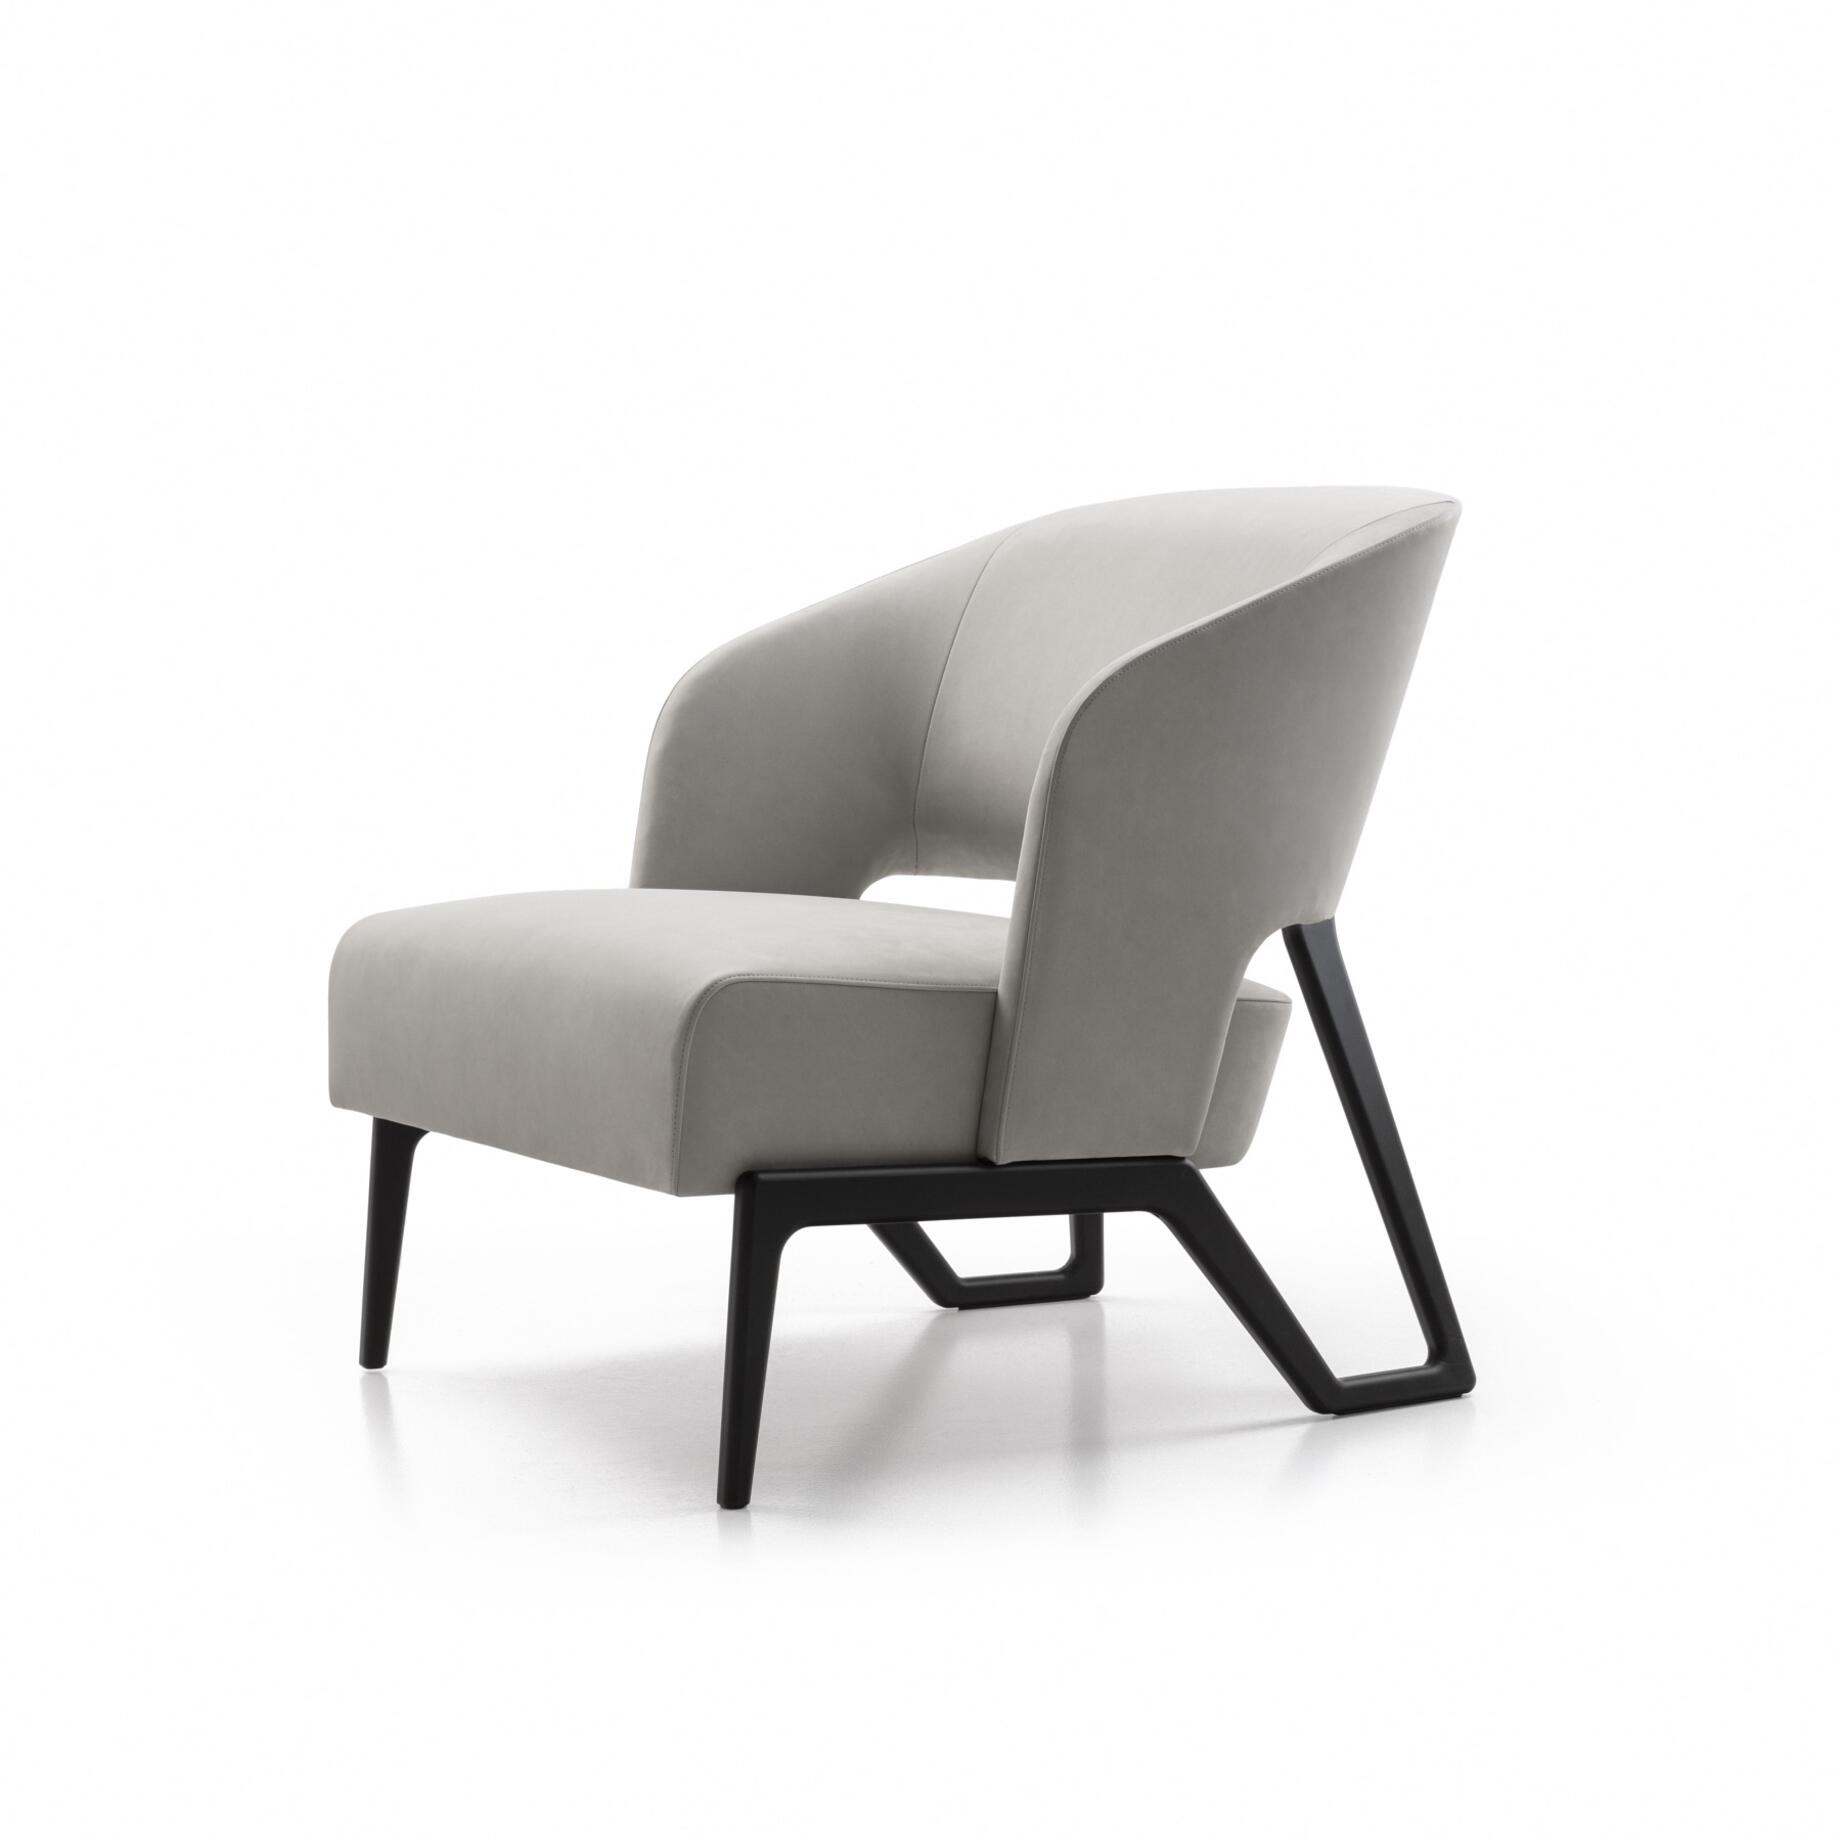 Tubac Lounge Chair, Shadow Black Anodized Aluminum, Nordic: Iced